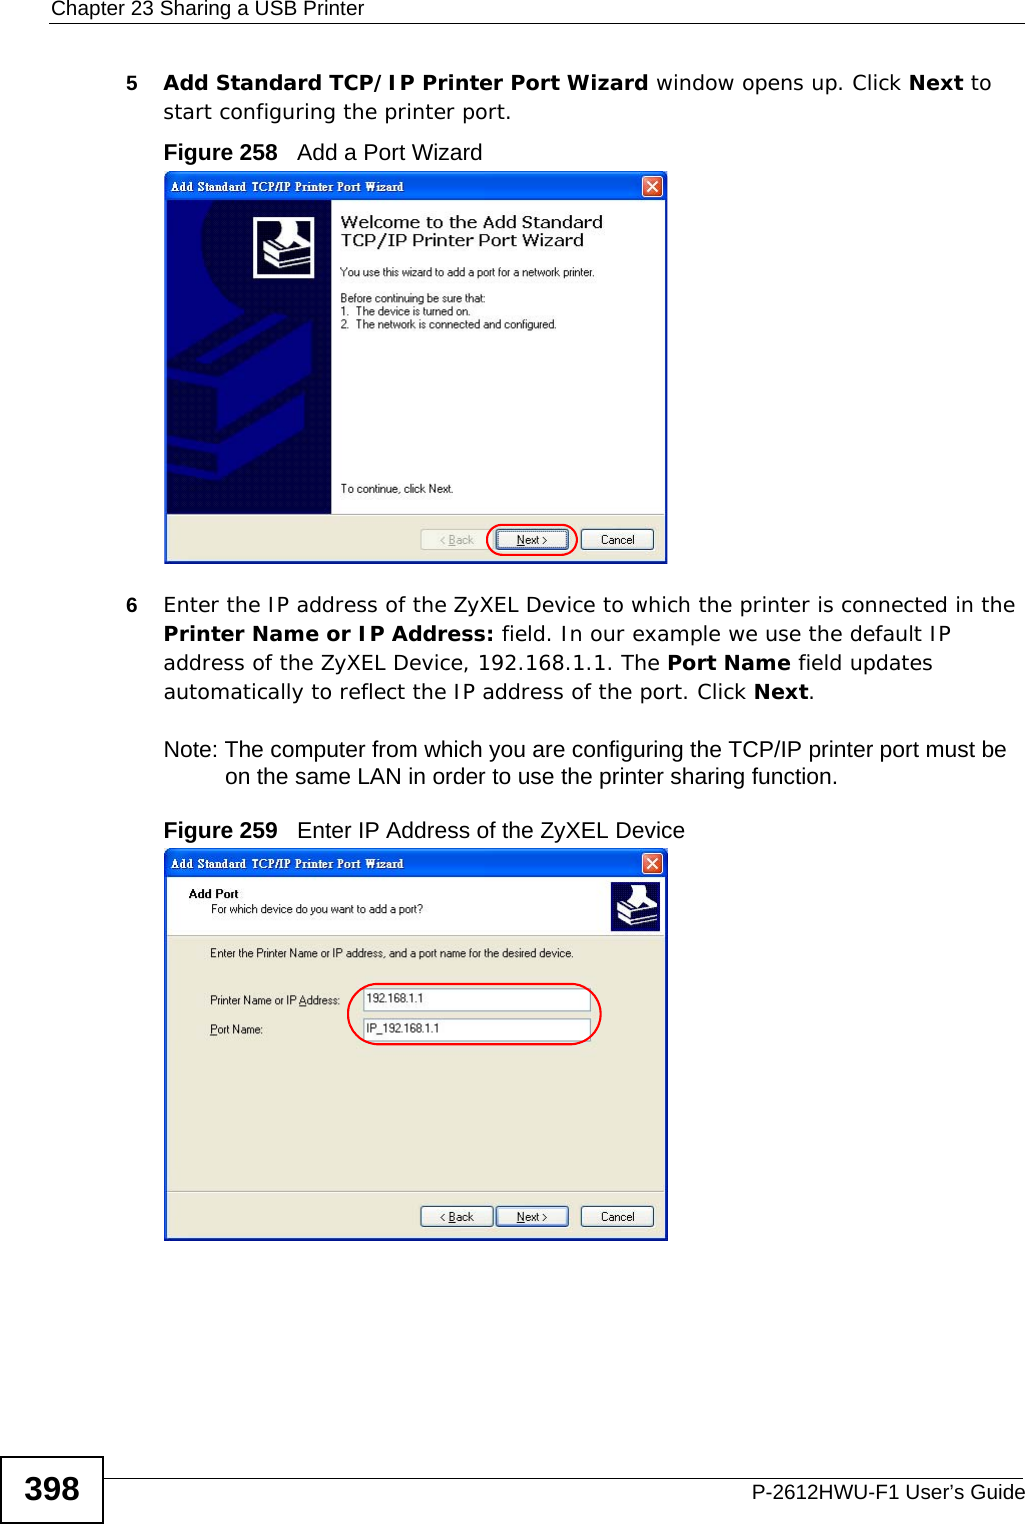 Chapter 23 Sharing a USB PrinterP-2612HWU-F1 User’s Guide3985Add Standard TCP/IP Printer Port Wizard window opens up. Click Next to start configuring the printer port.Figure 258   Add a Port Wizard6Enter the IP address of the ZyXEL Device to which the printer is connected in the Printer Name or IP Address: field. In our example we use the default IP address of the ZyXEL Device, 192.168.1.1. The Port Name field updates automatically to reflect the IP address of the port. Click Next.Note: The computer from which you are configuring the TCP/IP printer port must be on the same LAN in order to use the printer sharing function.Figure 259   Enter IP Address of the ZyXEL Device